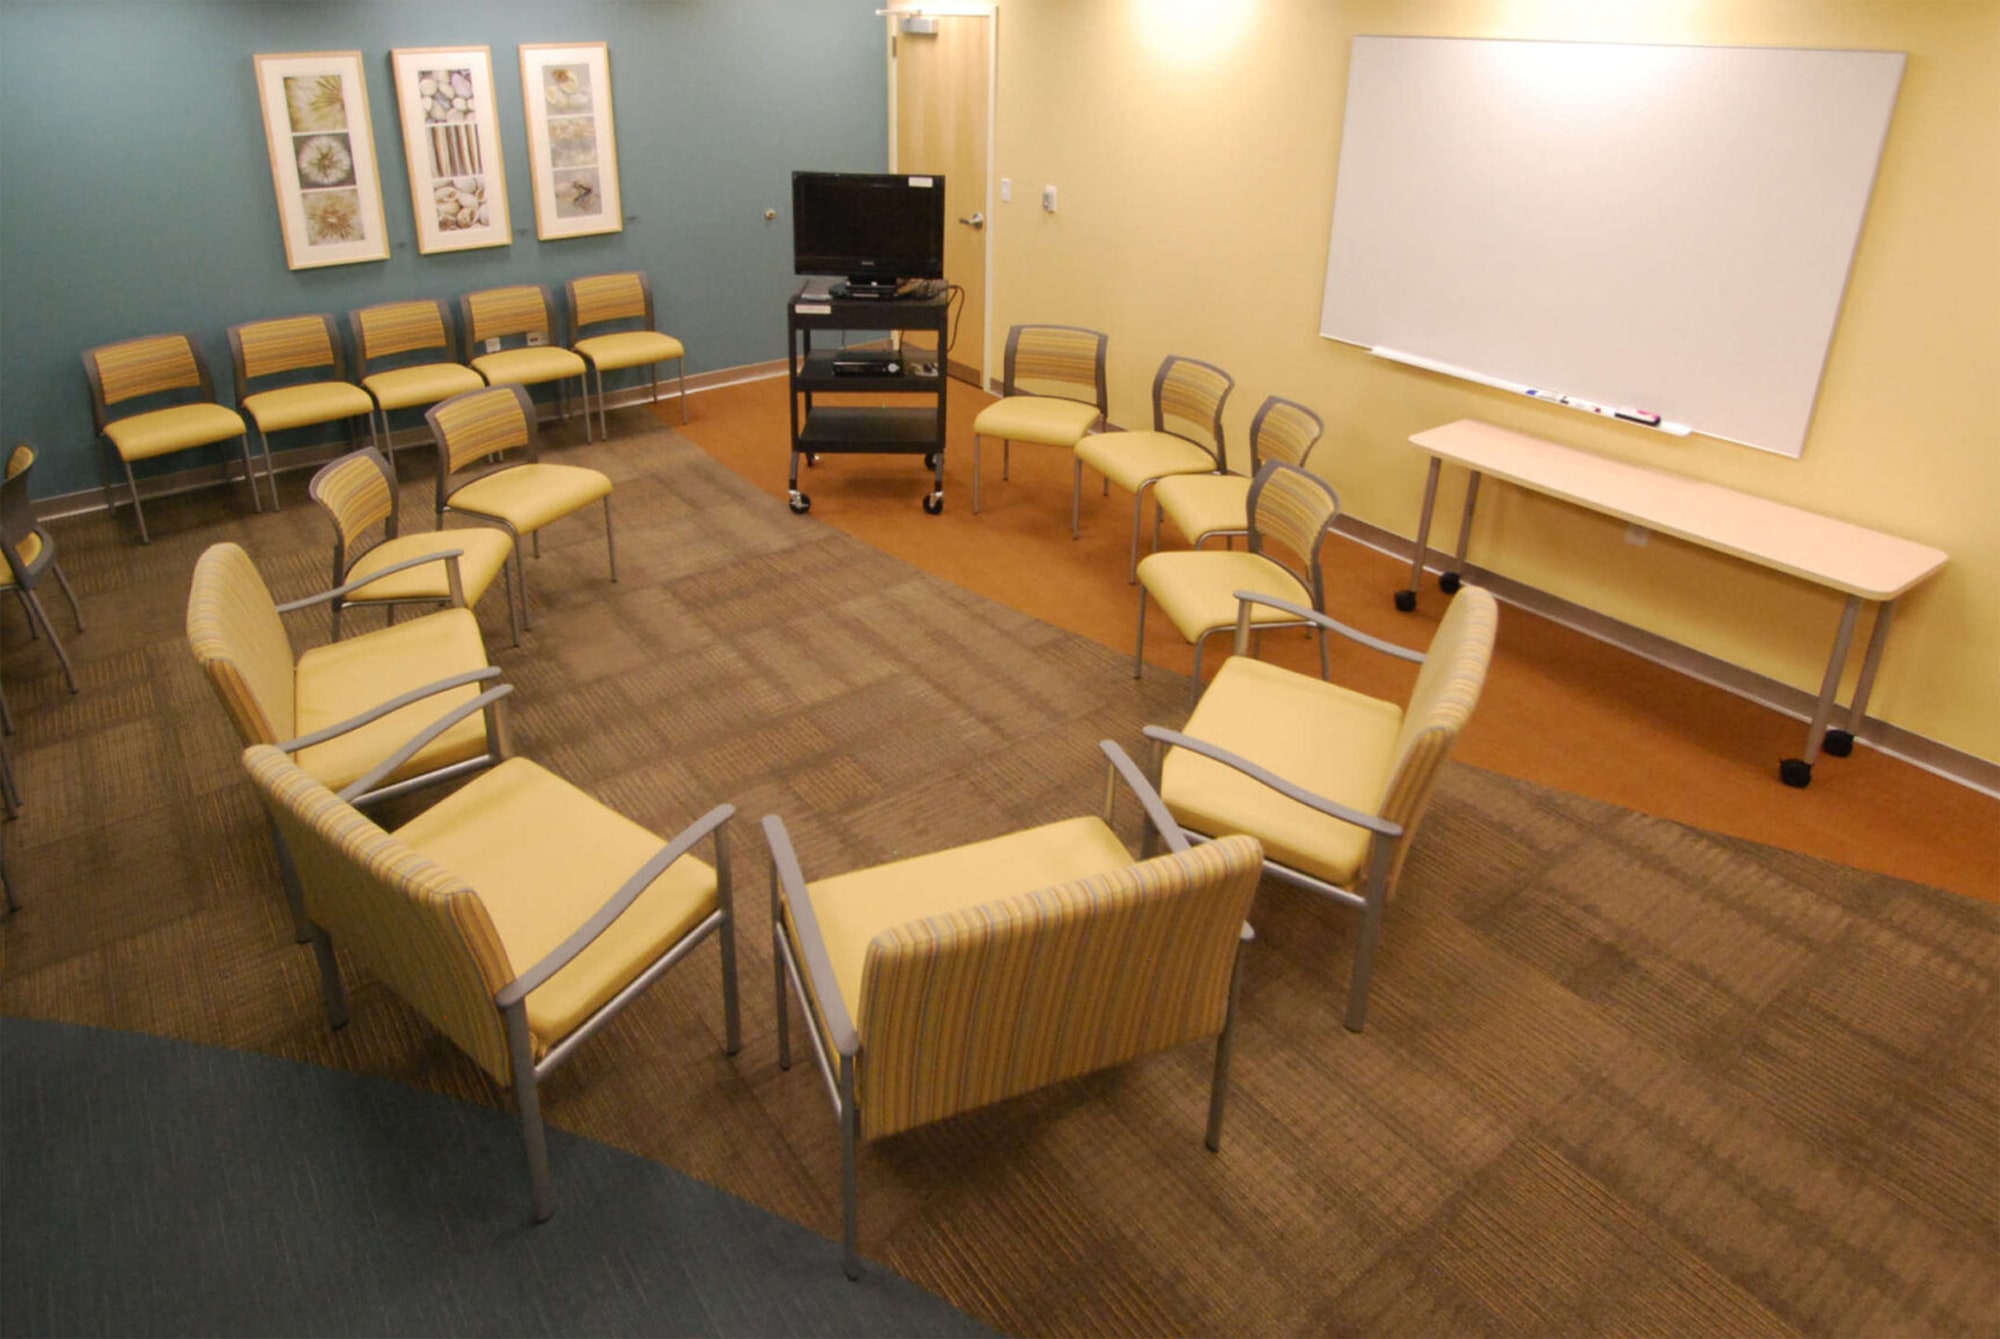 Room with chairs in a circle at the Hillcrest Mental Health Facility